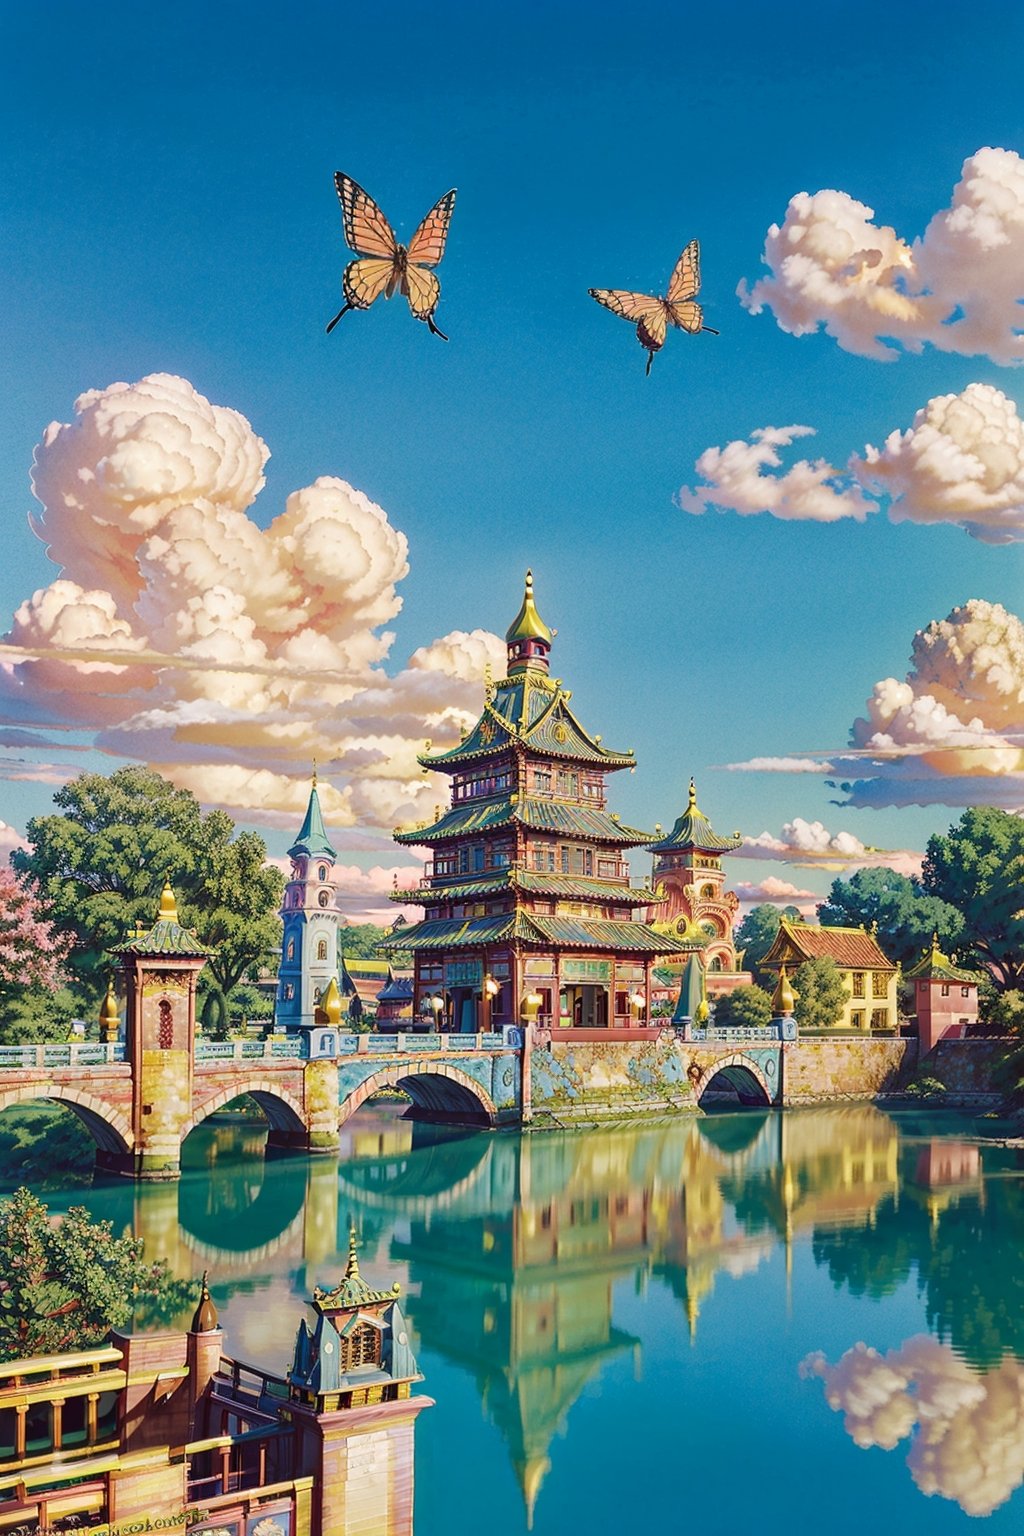 (1girl :1.5), front shot, adorable, (ultra detailed, ultra highres), (masterpiece, top quality, best quality, official art :1.4), (high quality:1.3), cinematic, wide shot, (muted colors, dim colors), A whimsical cityscape under a bright blue sky with fluffy clouds and butterflies. The city features traditional wooden buildings and a fantastical structure that combines a castle, a pagoda, (and a Ferris wheel). The colors are vibrant and detailed. 4k, perfect hands, perfect fingers, Ghiblism2-Ghibli, GhiblismDetailed2, Ghiblismkw2 extremely detailed CG, photorealistic,Anitoon2,Pastel color